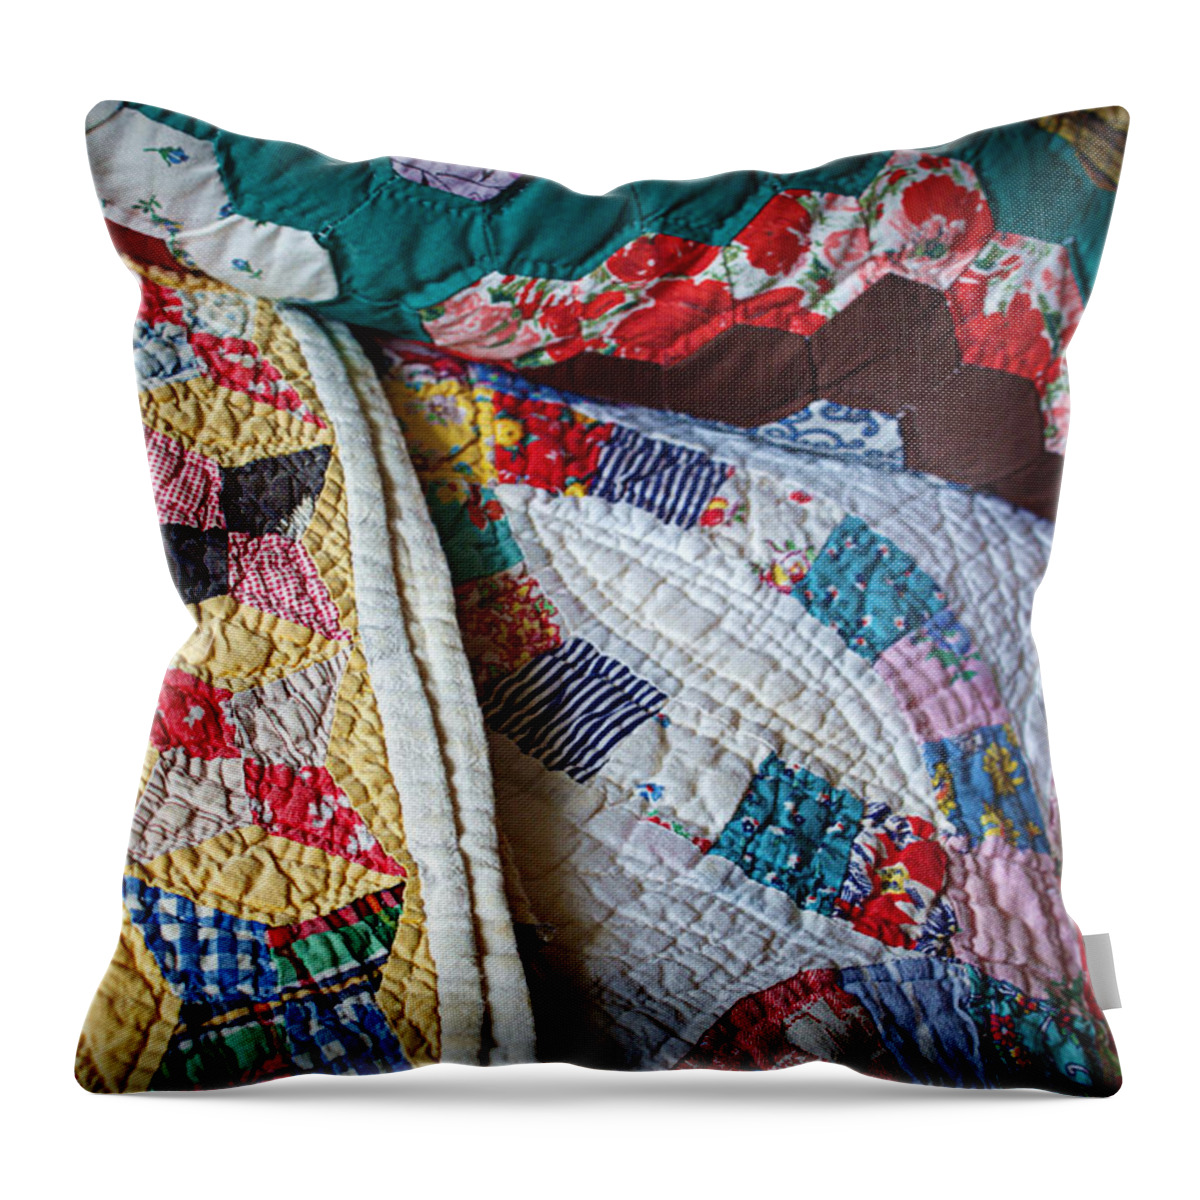 Quilt Throw Pillow featuring the photograph Quilted Comfort by Cricket Hackmann